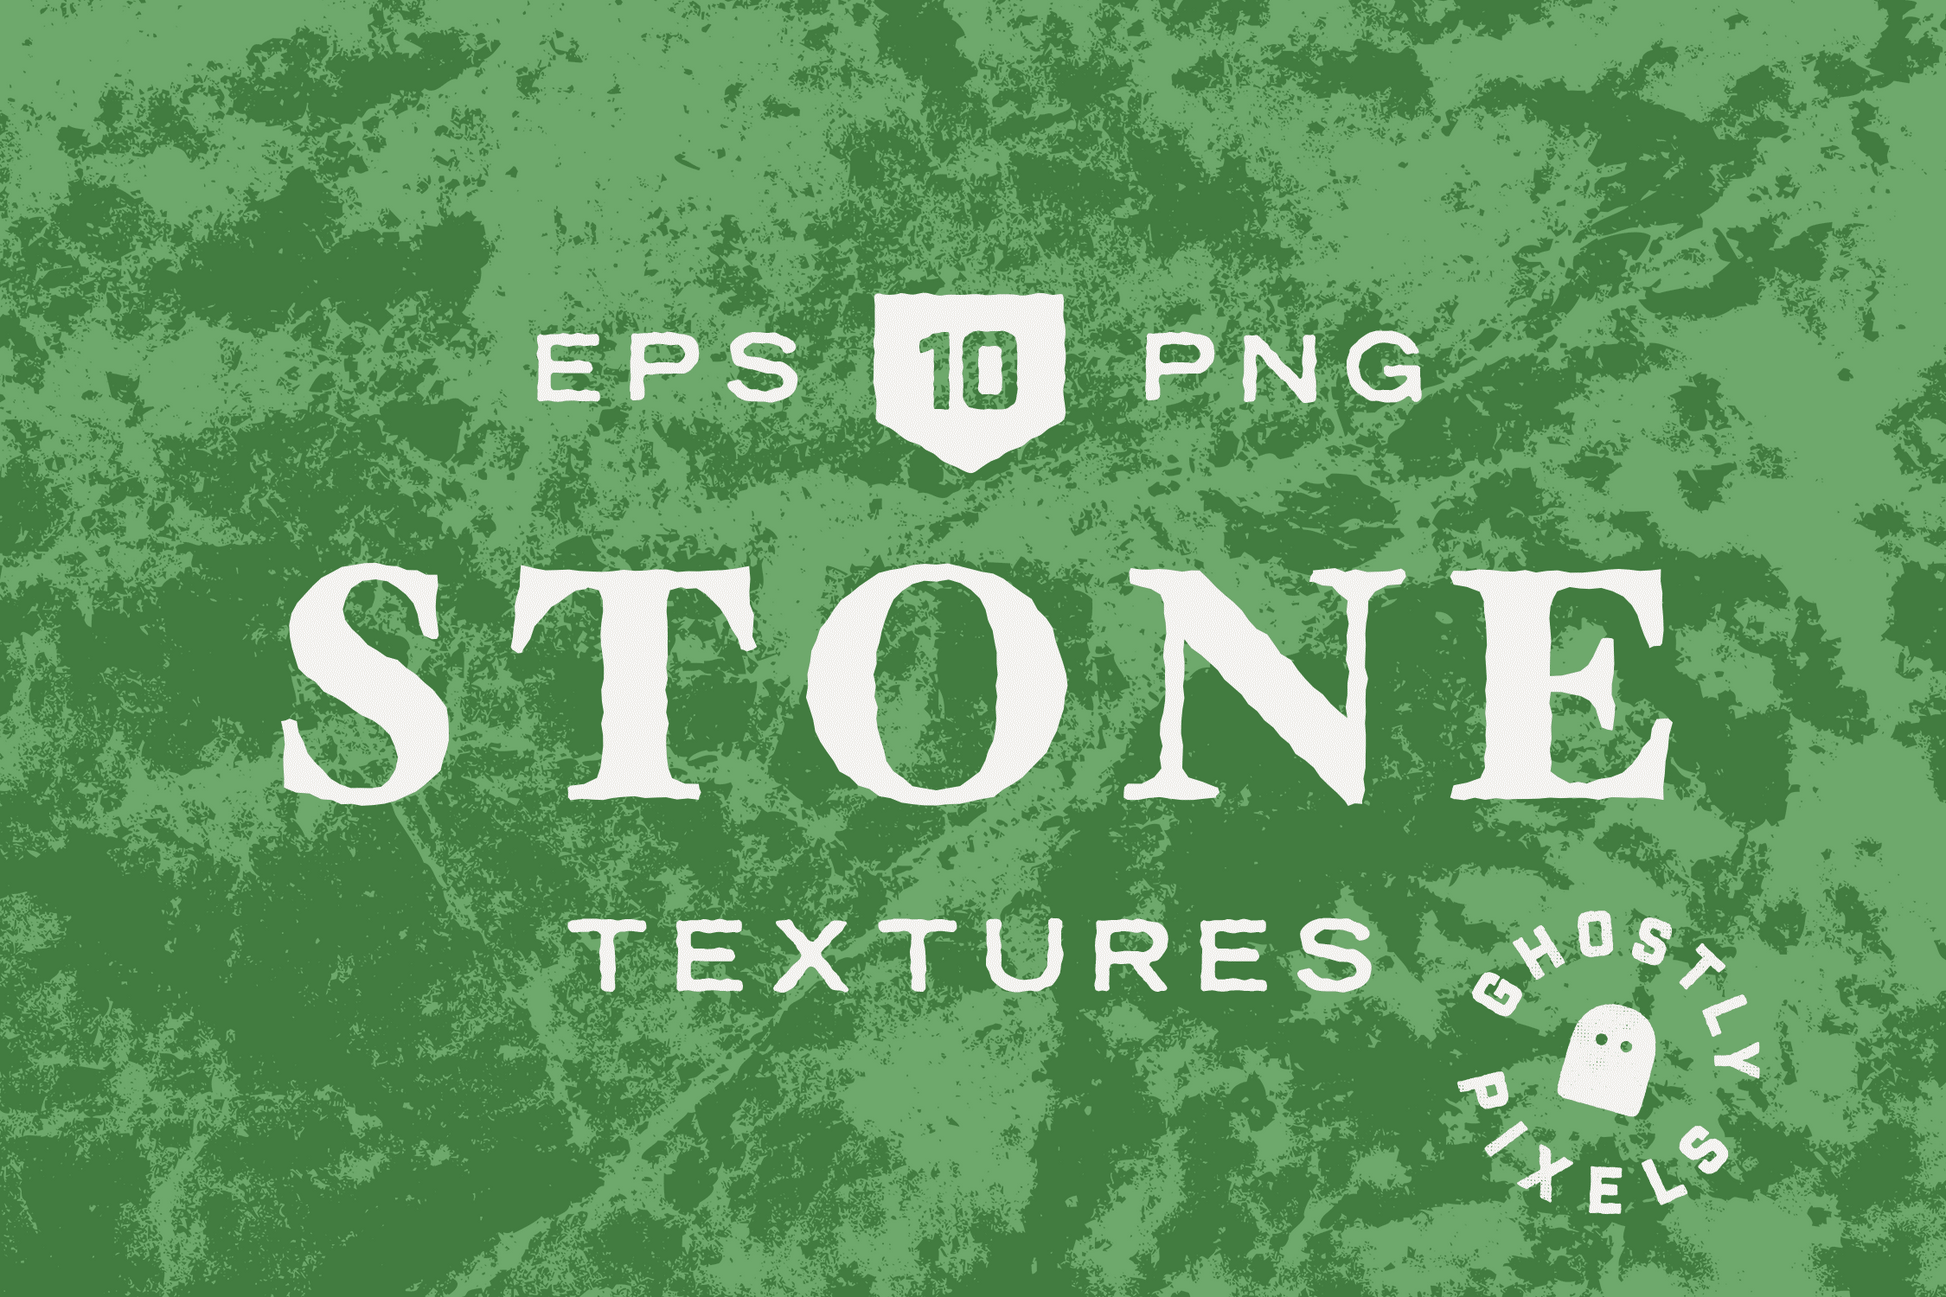 Stone marble textures (vector)